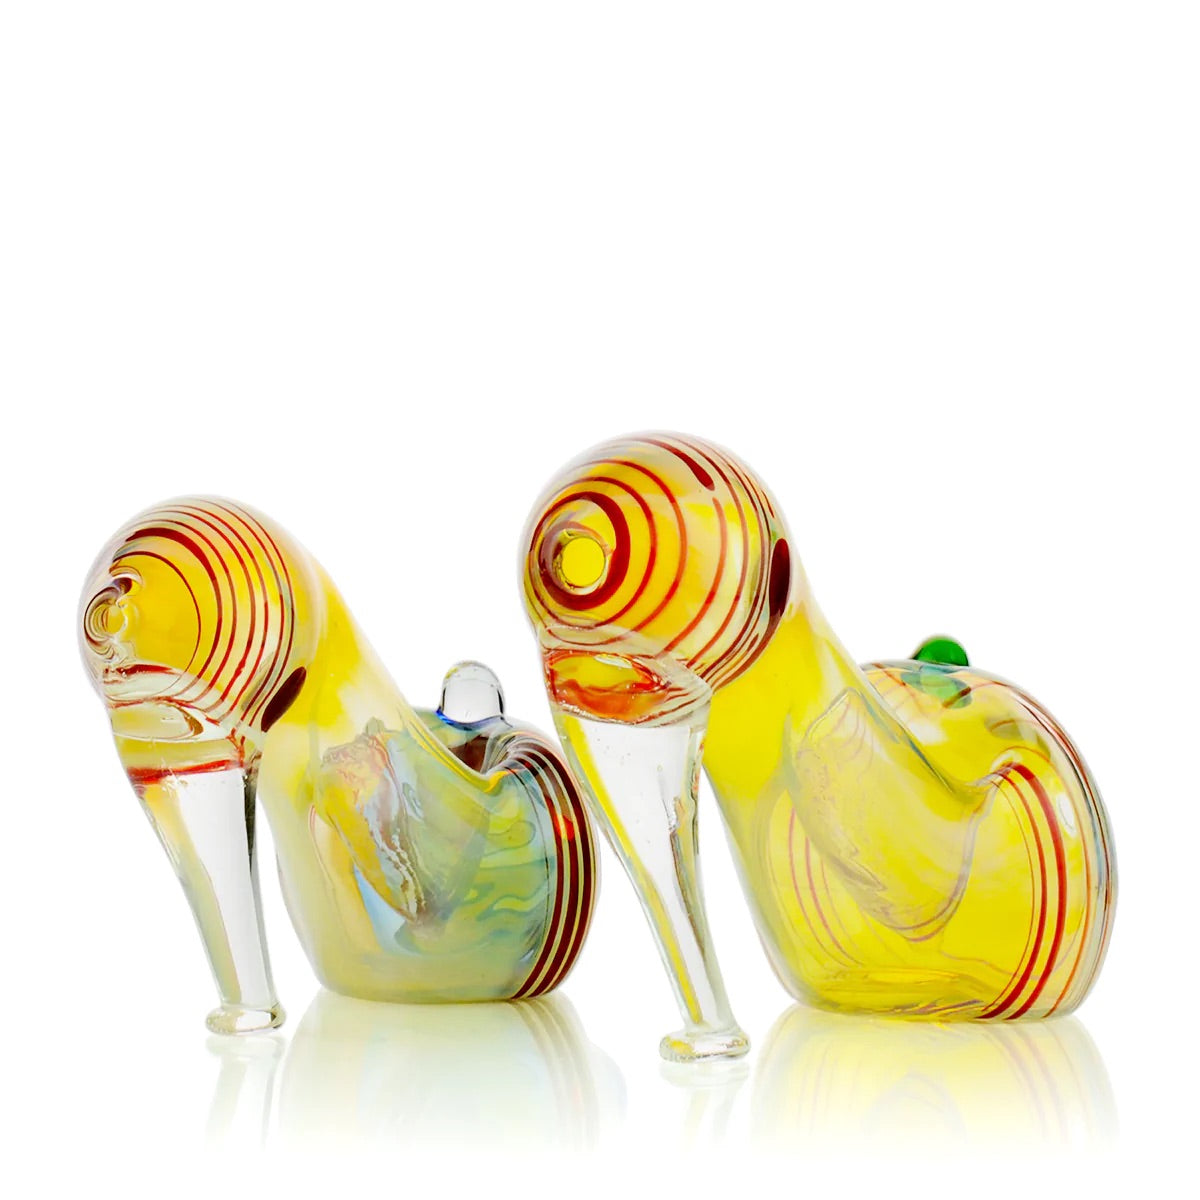 The Little Glass Slipper Hand Pipe - 5 inches WoB